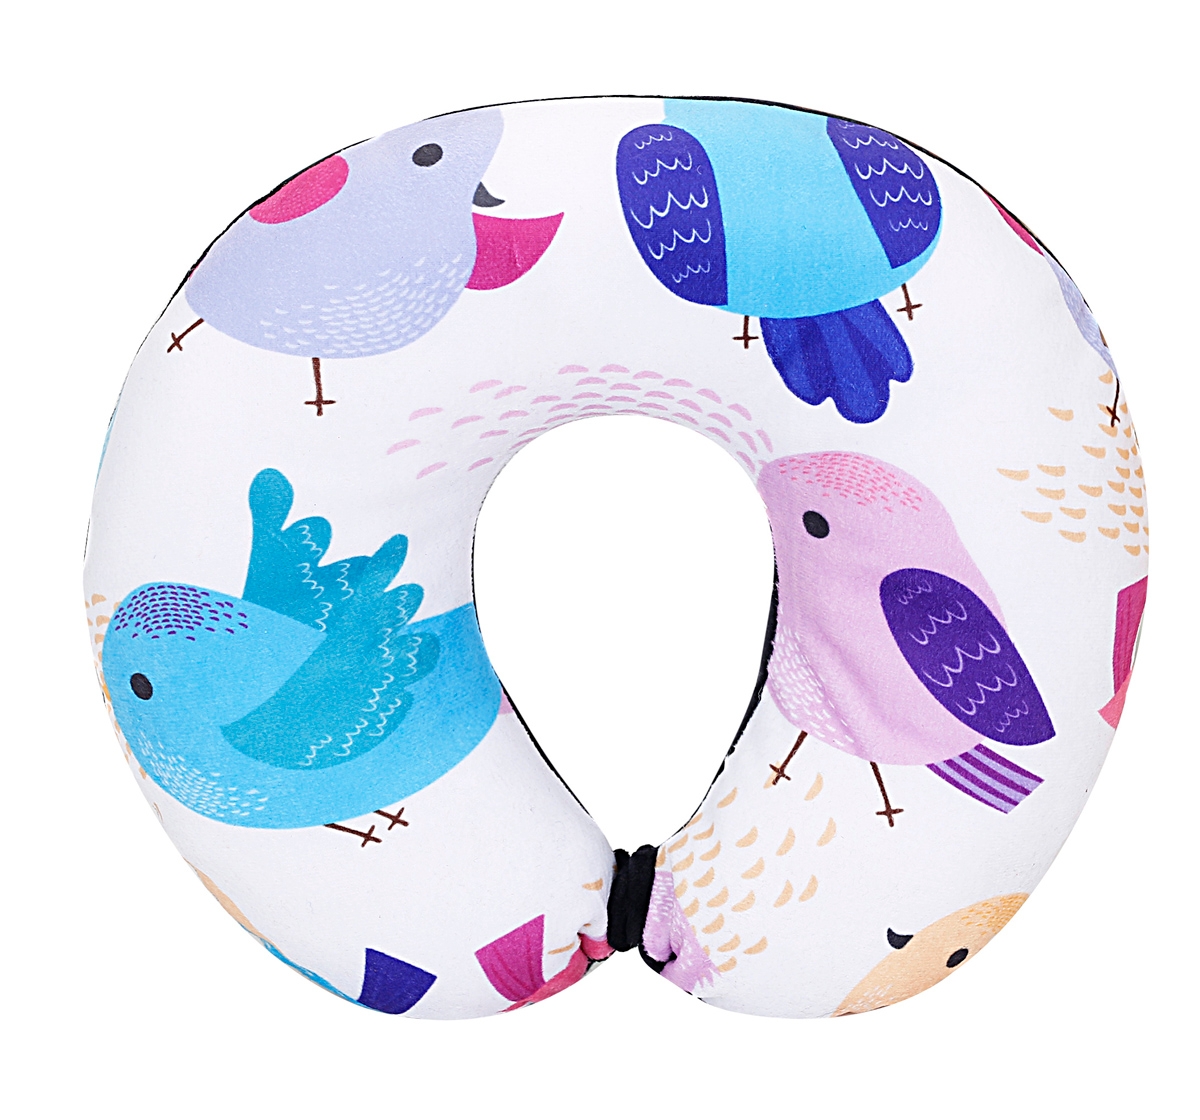 Luvley | Luvley Cute Birds Printed Neck Pillow for kids 3Y+, Multicolour